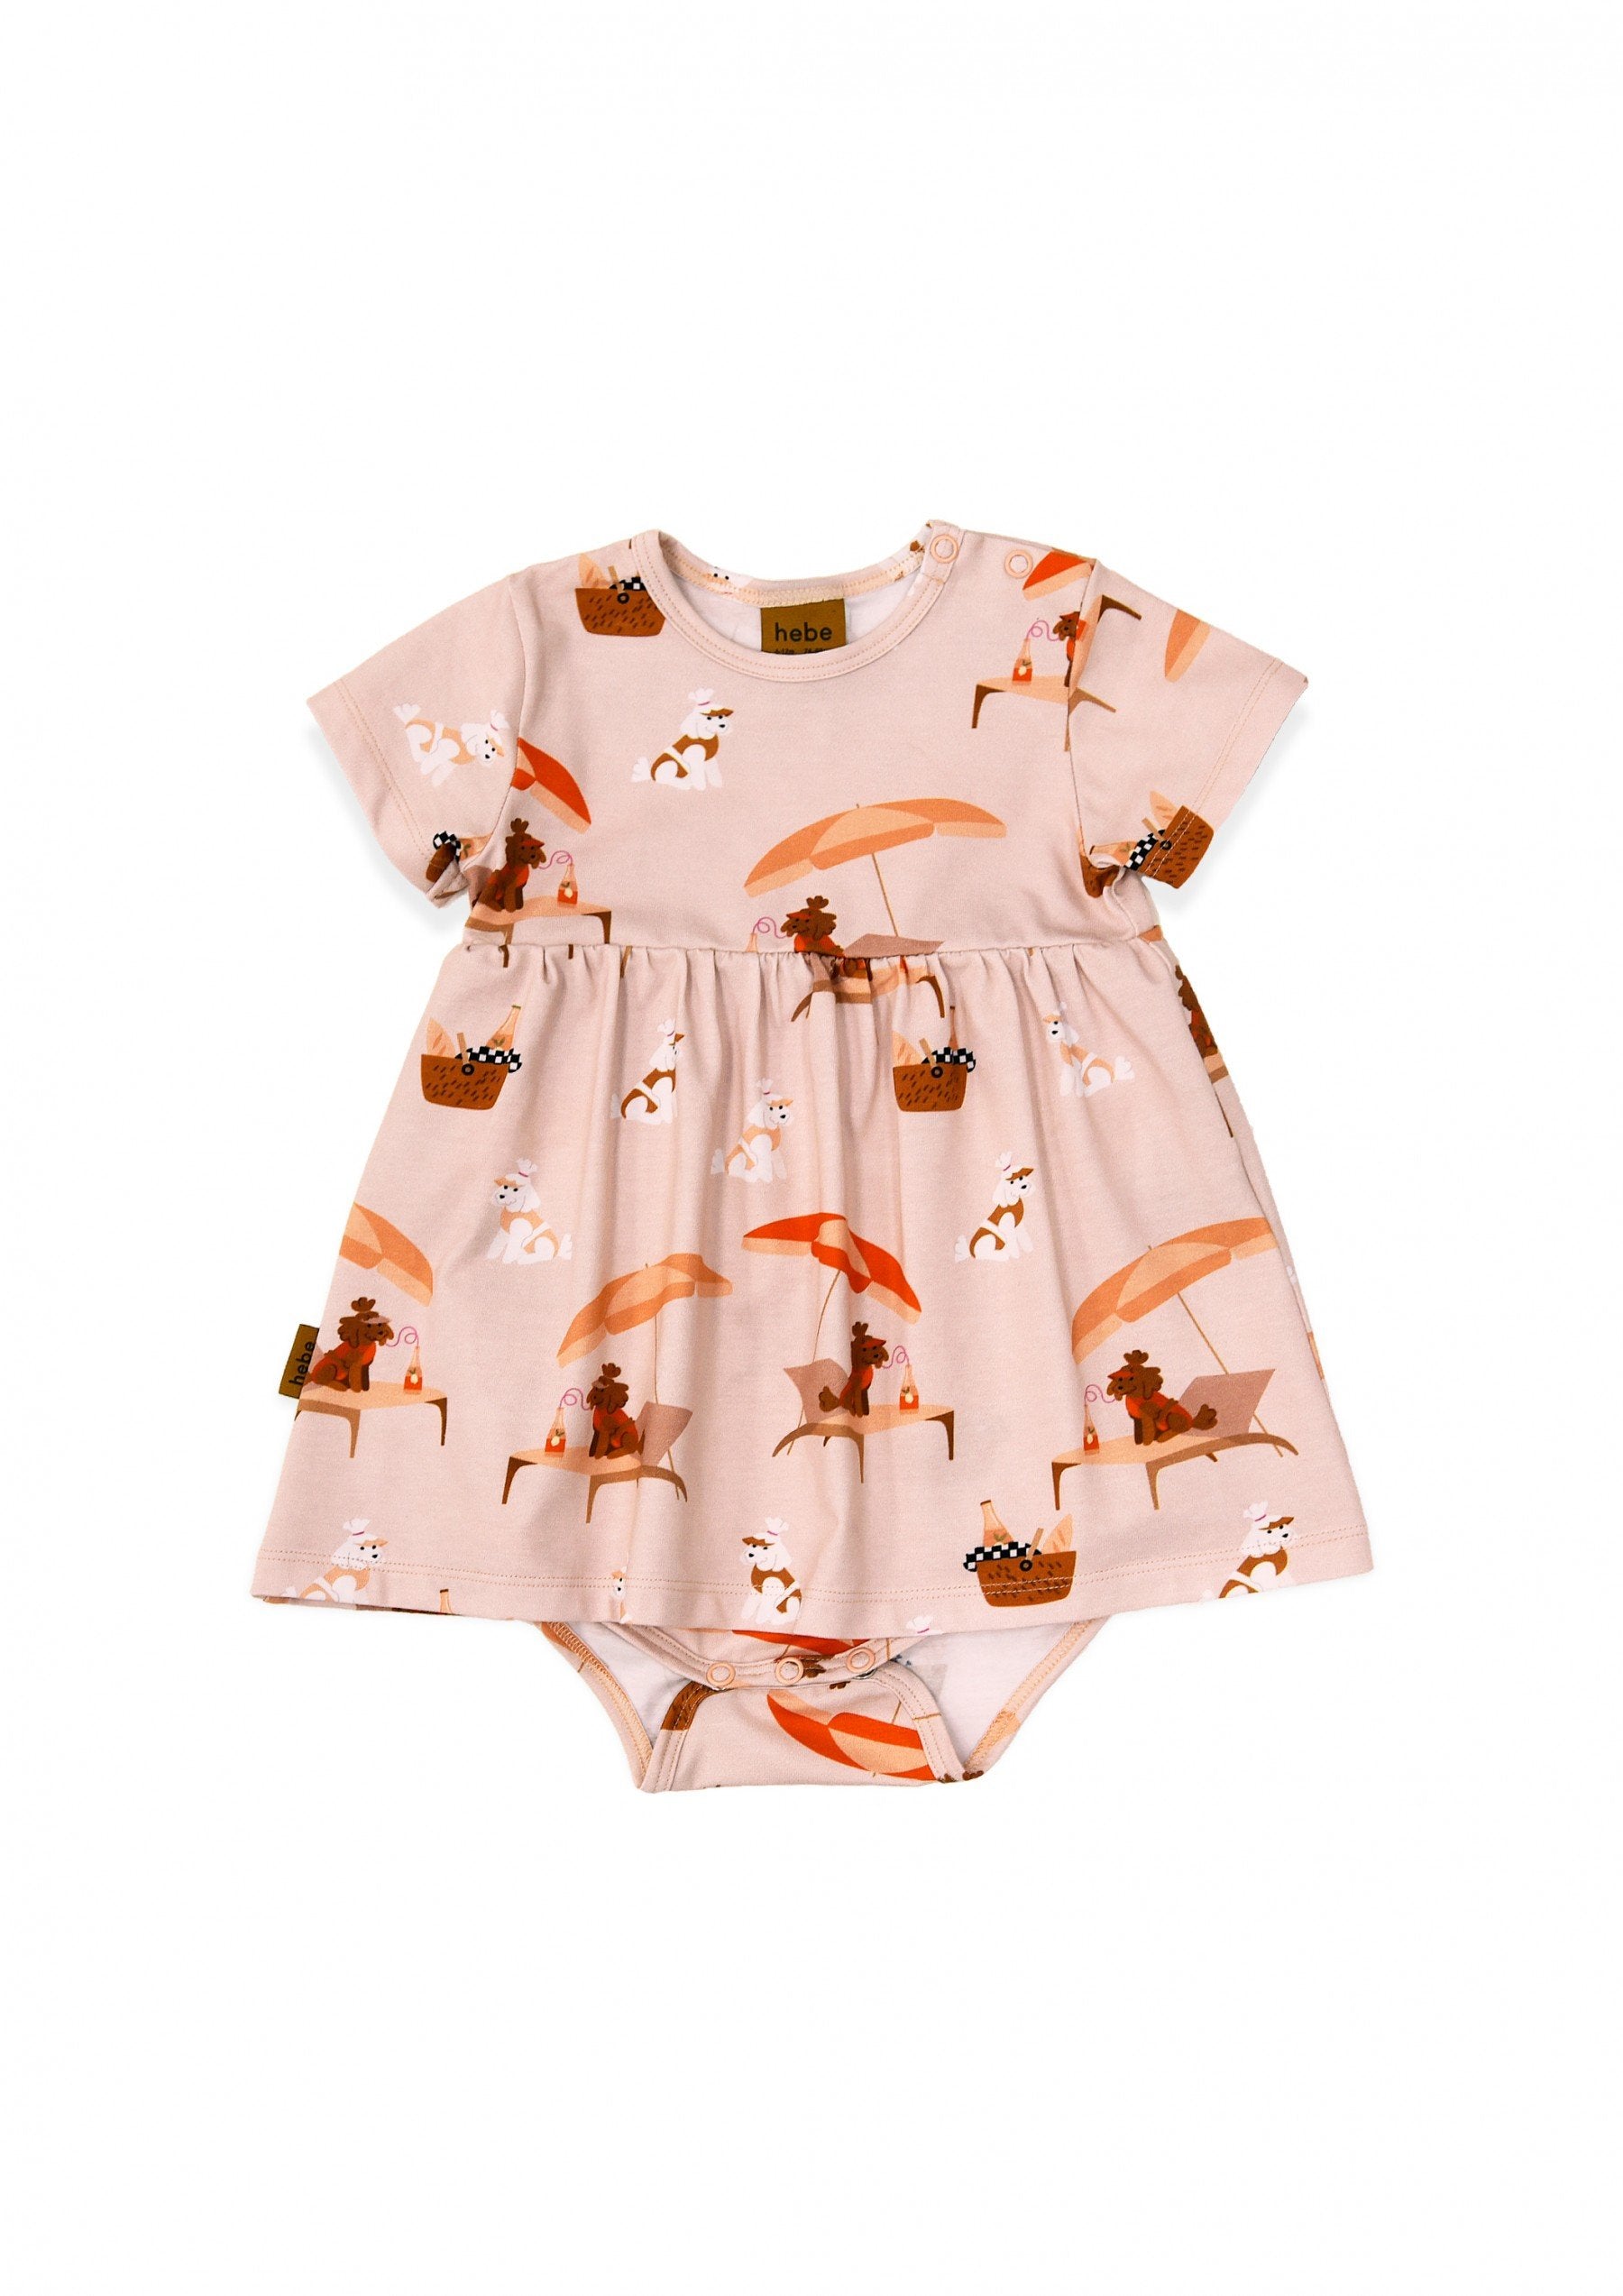 Hebe Body Dress - Pink with Dog and Umbrella Print